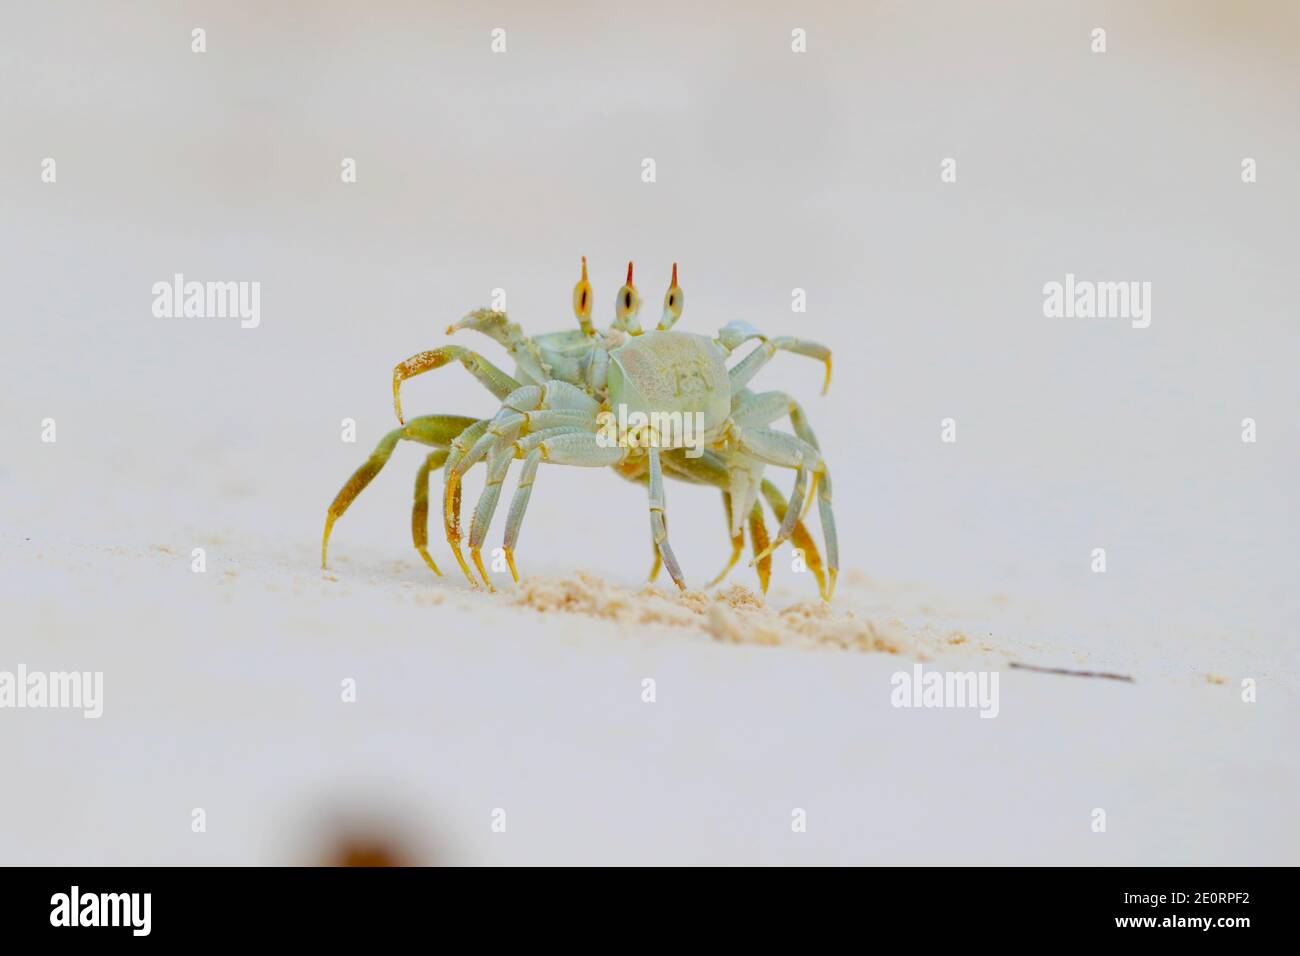 Two Horned Ghost Crabs or Horn-eyed Ghost Crabs (Ocypode ceratophthalmus) posturing and fighting after one stepped on the other's burrow, Seychelles Stock Photo